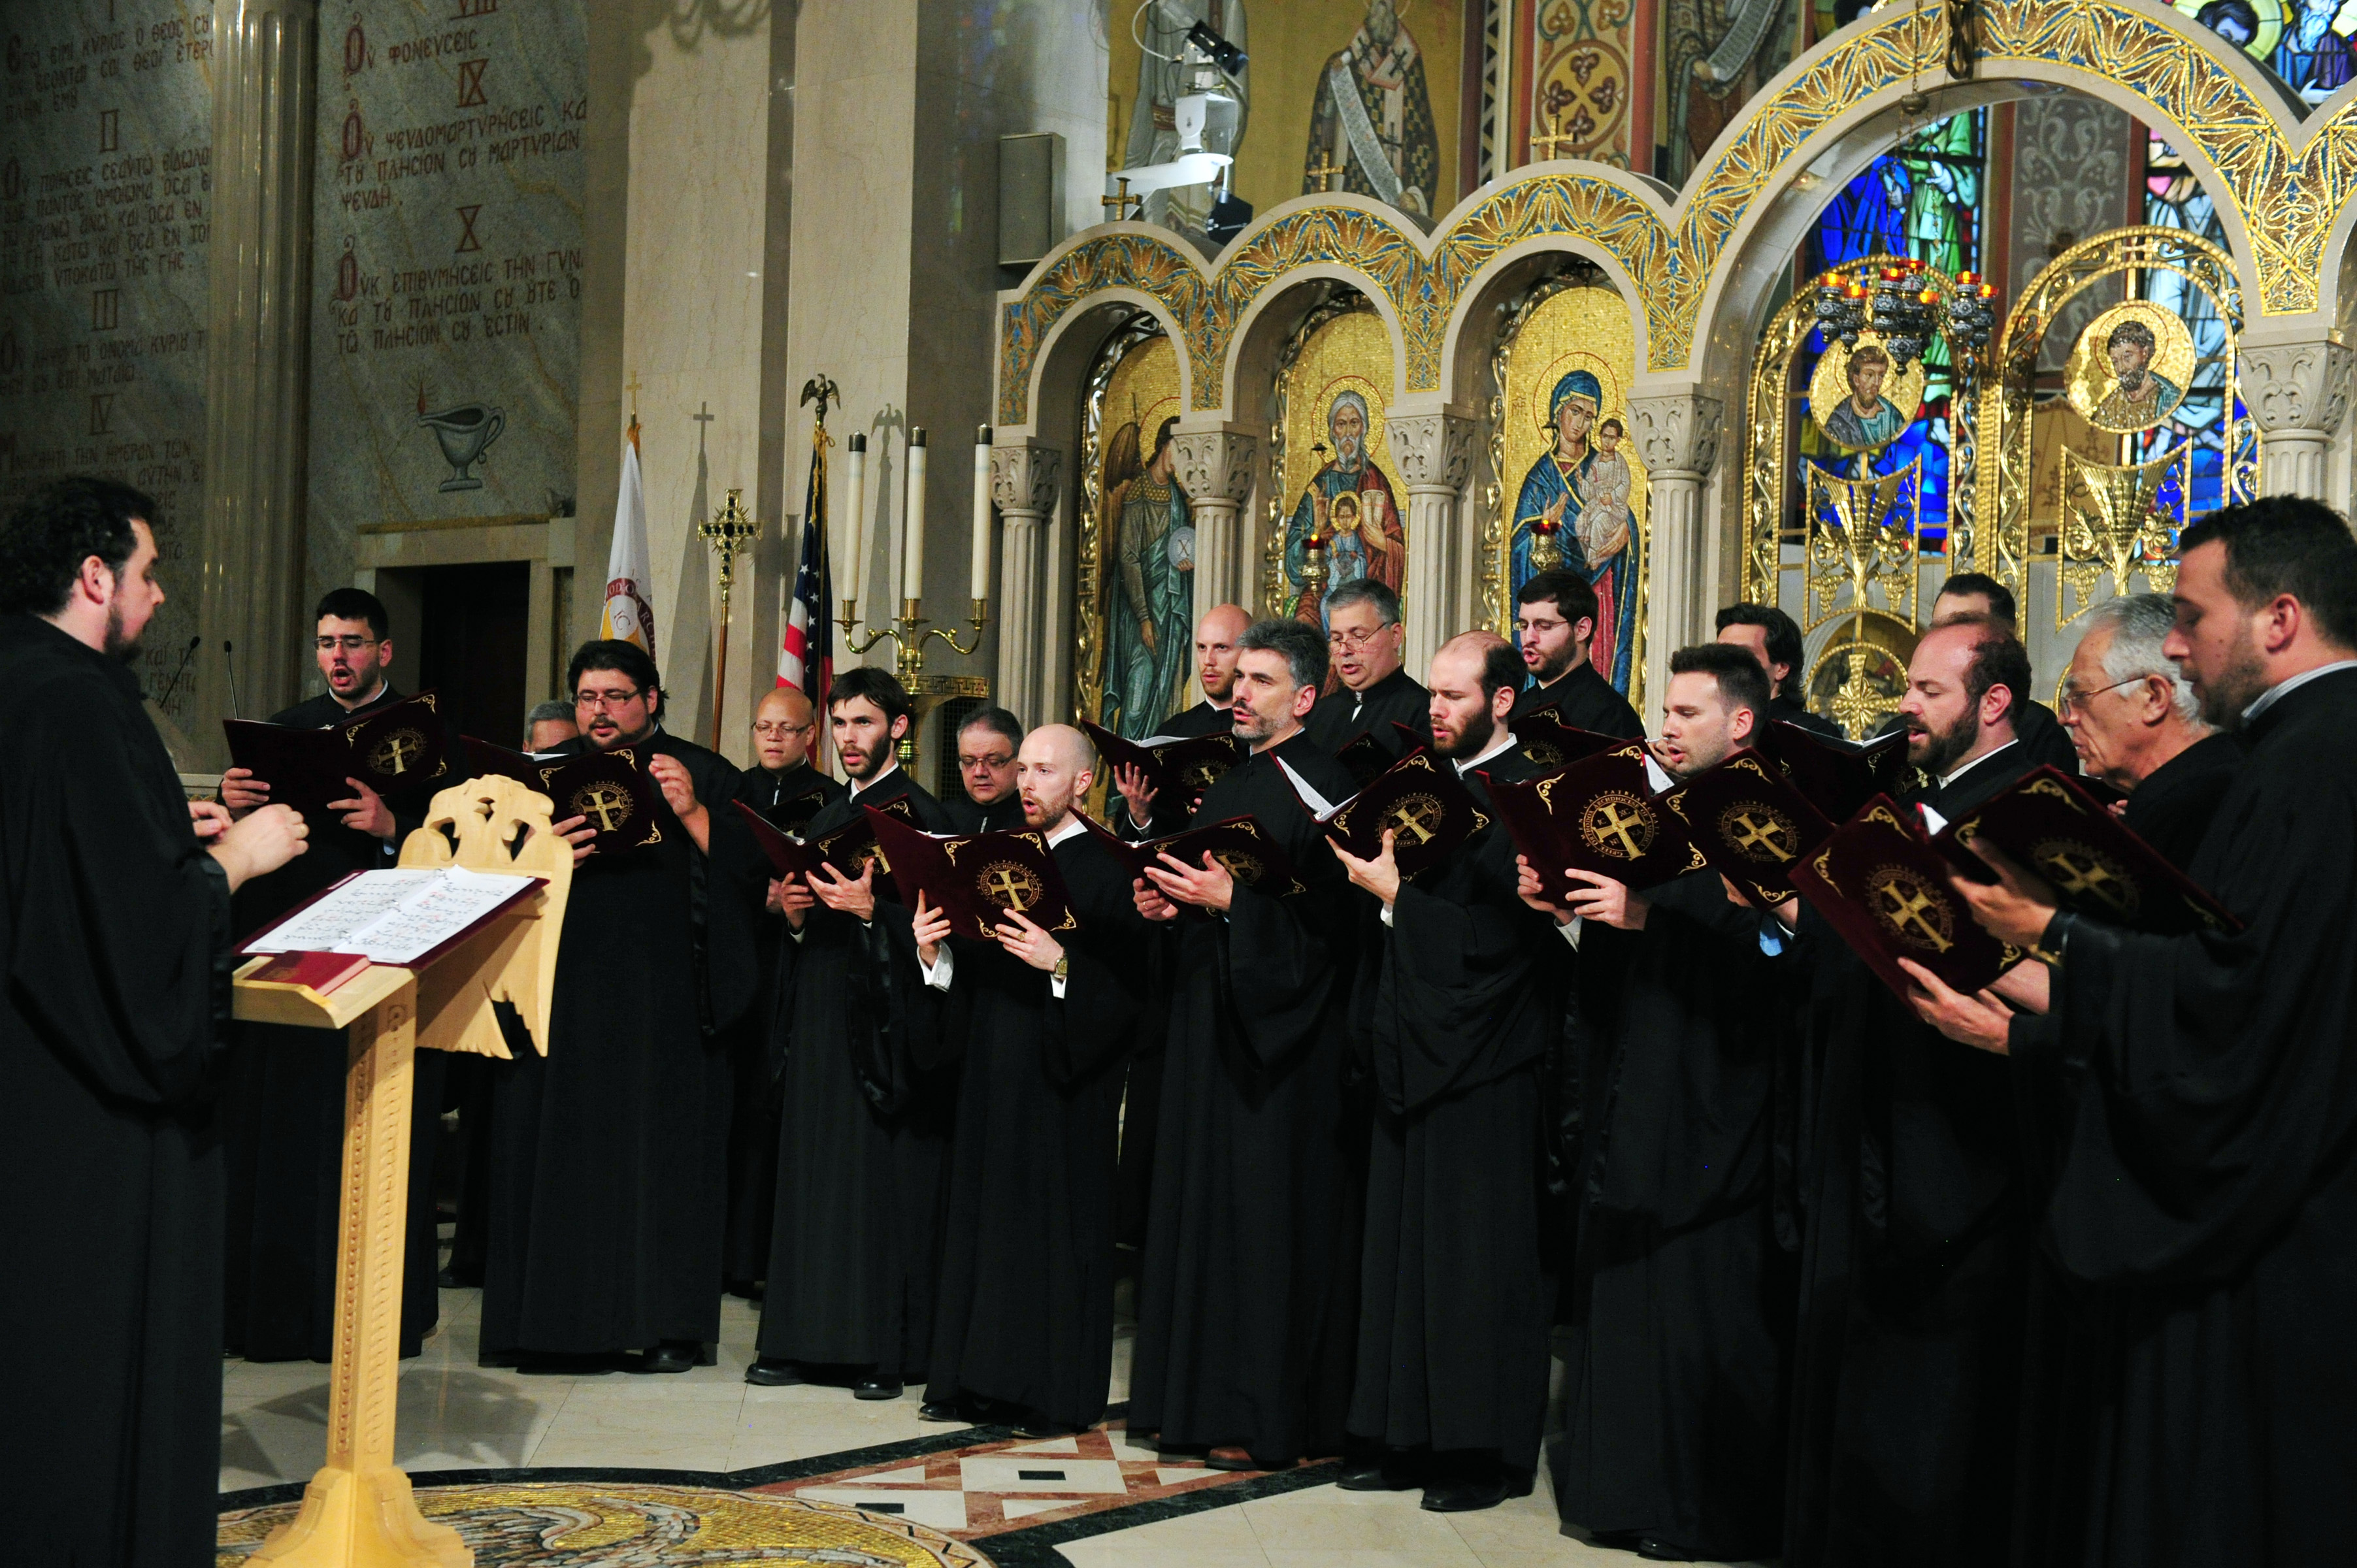 The Archdiocesan Byzantine Choir,and St. Kassiani Choir Concert at The Holy trinity Cathedral in NY. PHOTO:© DIMITRIOS PANAGOS-GANP/ΔΗΜΗΤΡΗΣ ΠΑΝΑΓΟΣ